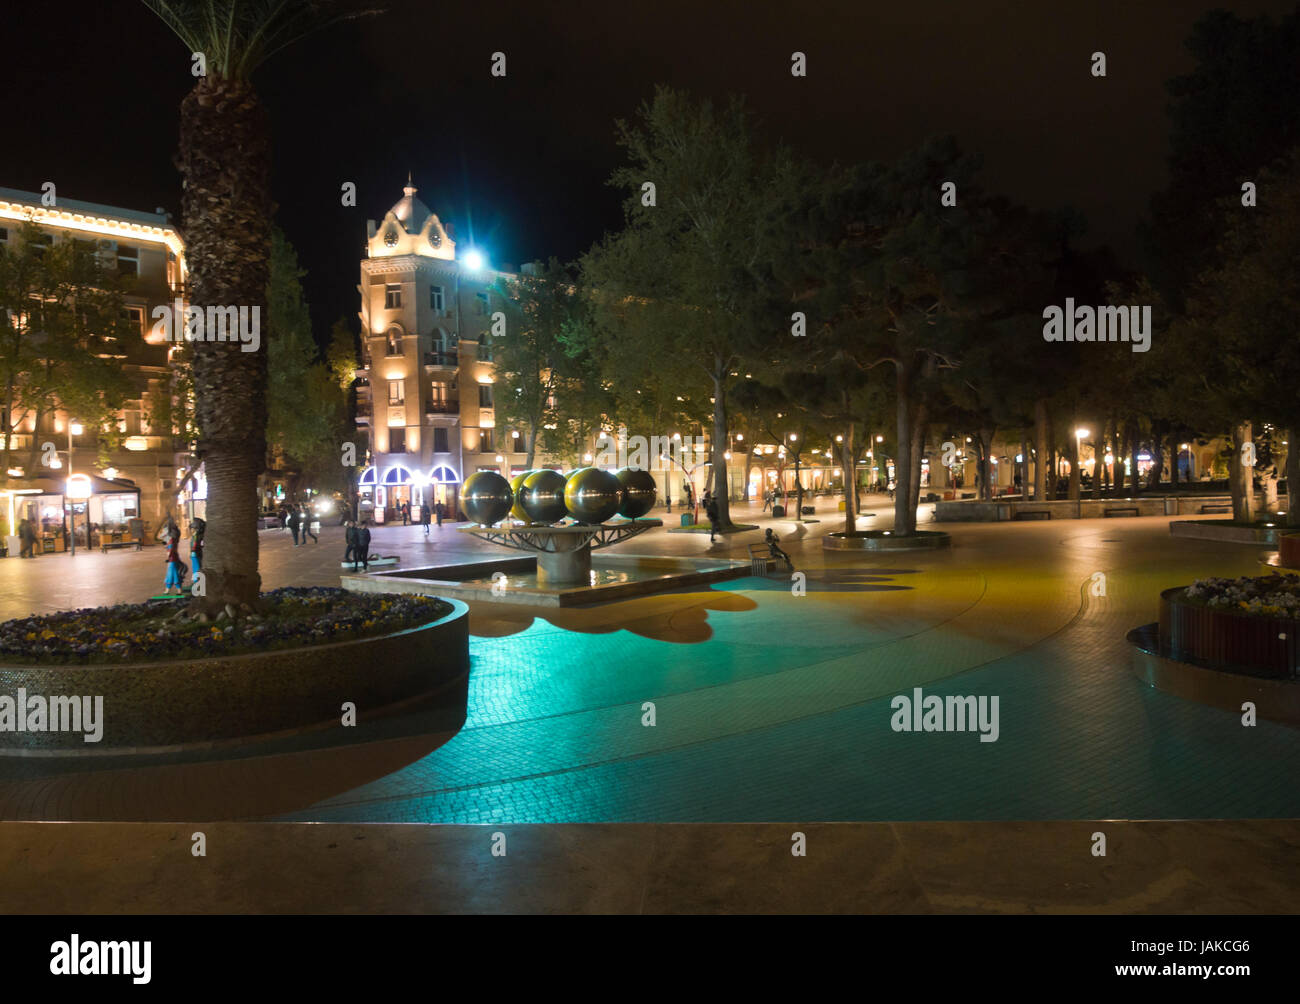 Night-time sightseeing in the inner city of Baku Azerbaijan, beautifully lit buildings and parks, people walking in pedestrian area Stock Photo